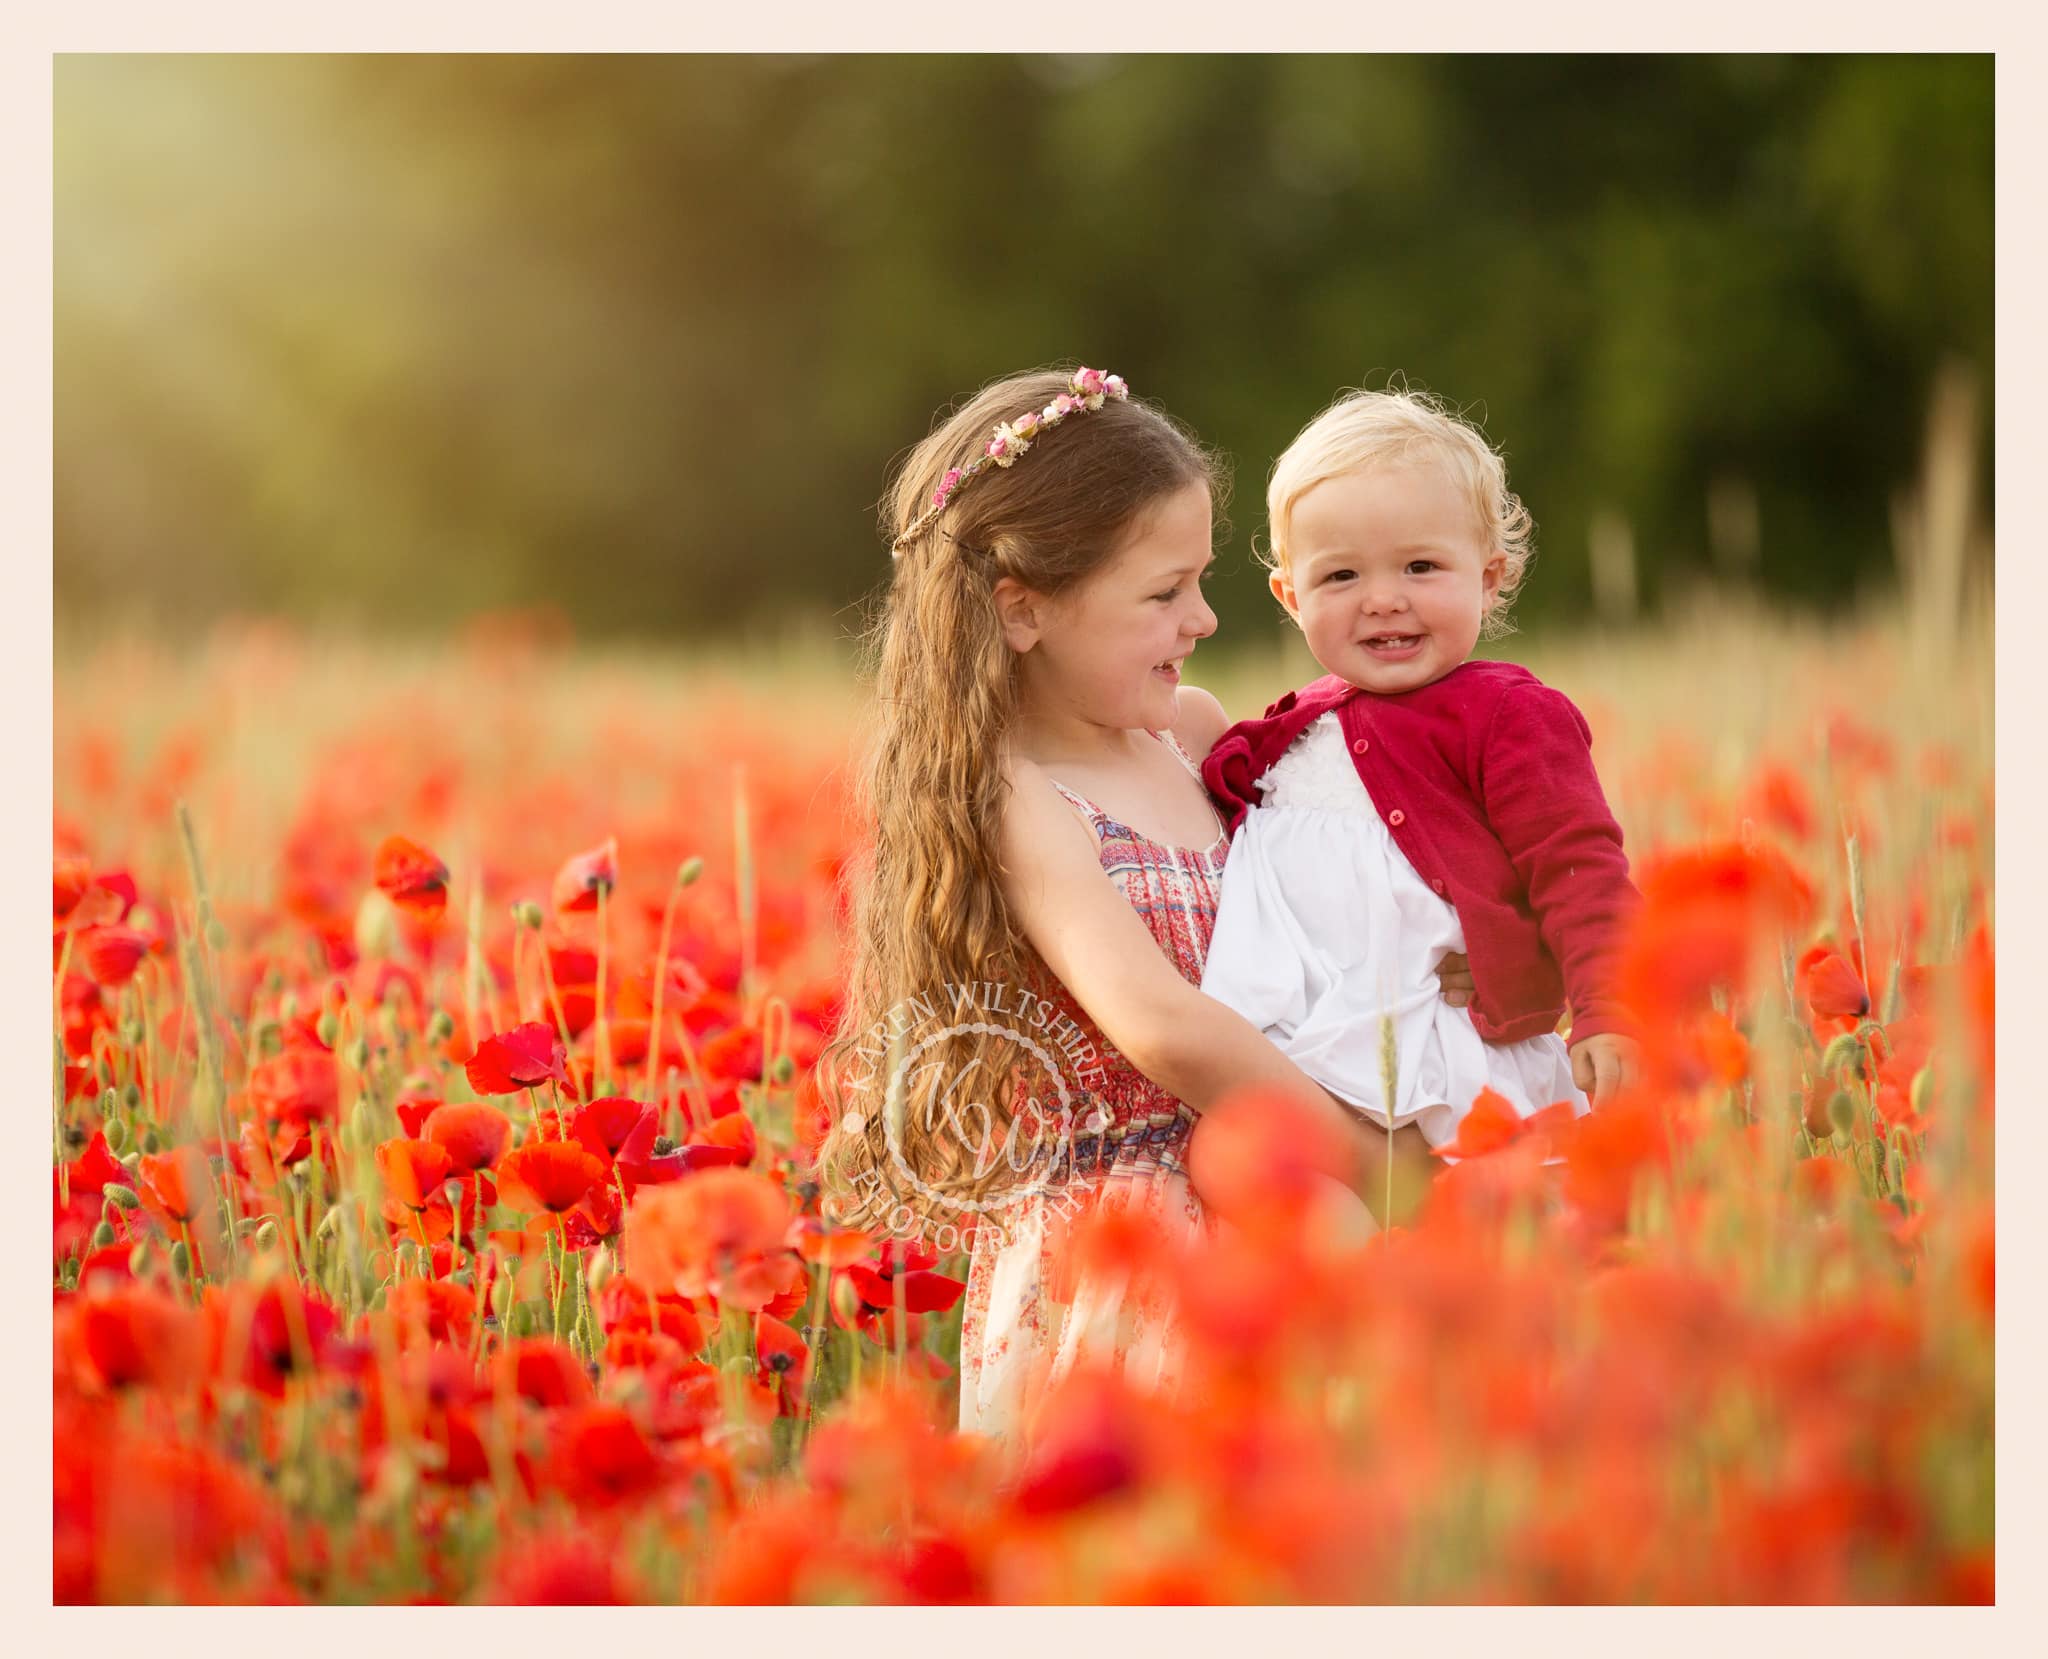 Sisters in field of red poppies